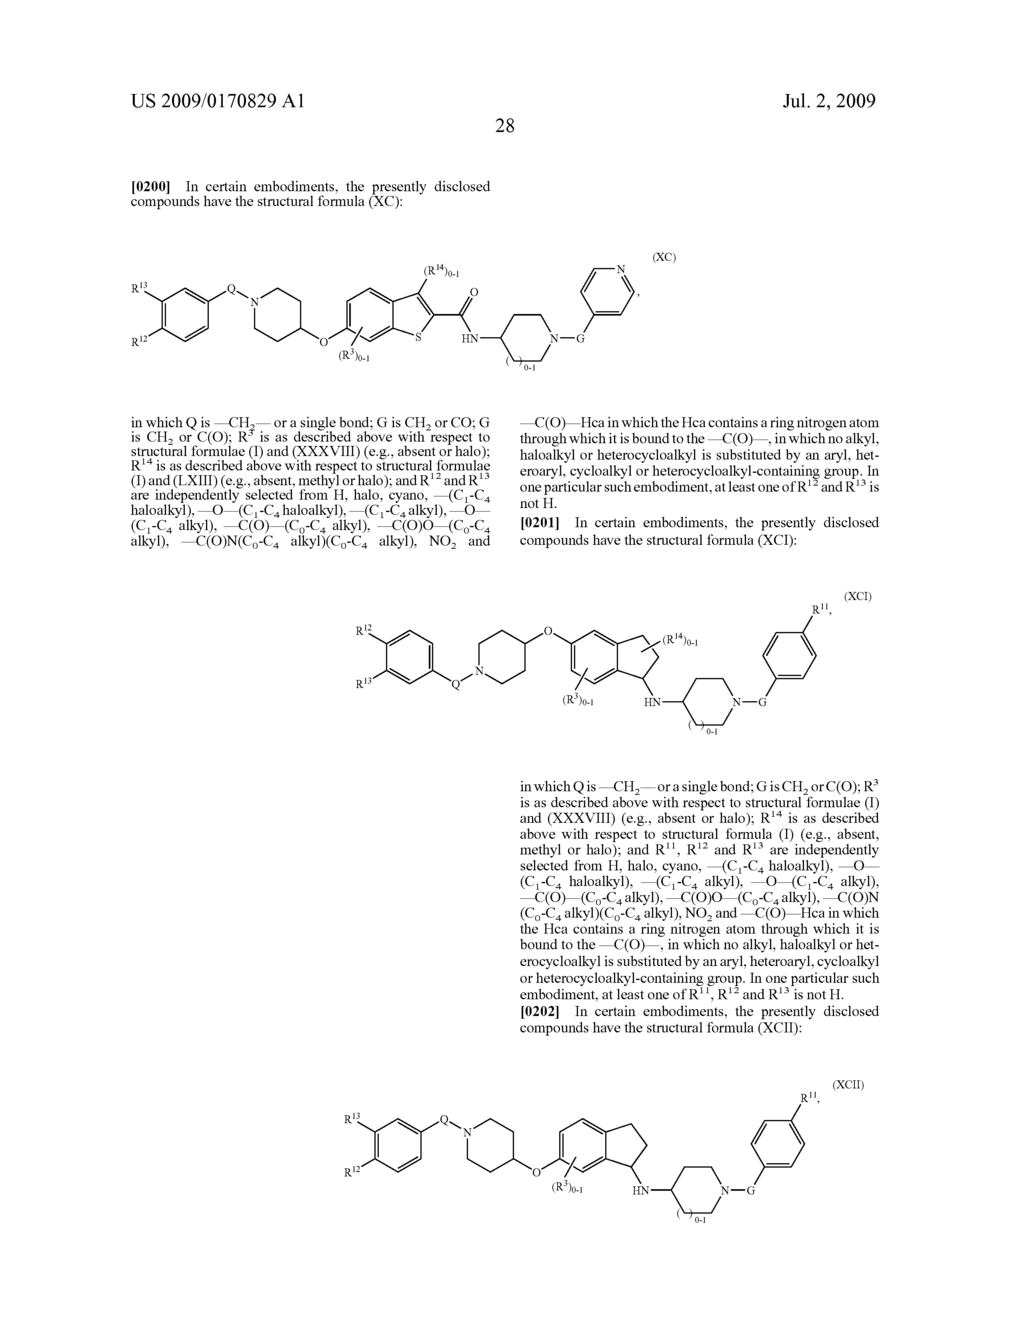 Carboxamide, Sulfonamide and Amine Compounds and Methods for Using The Same - diagram, schematic, and image 29